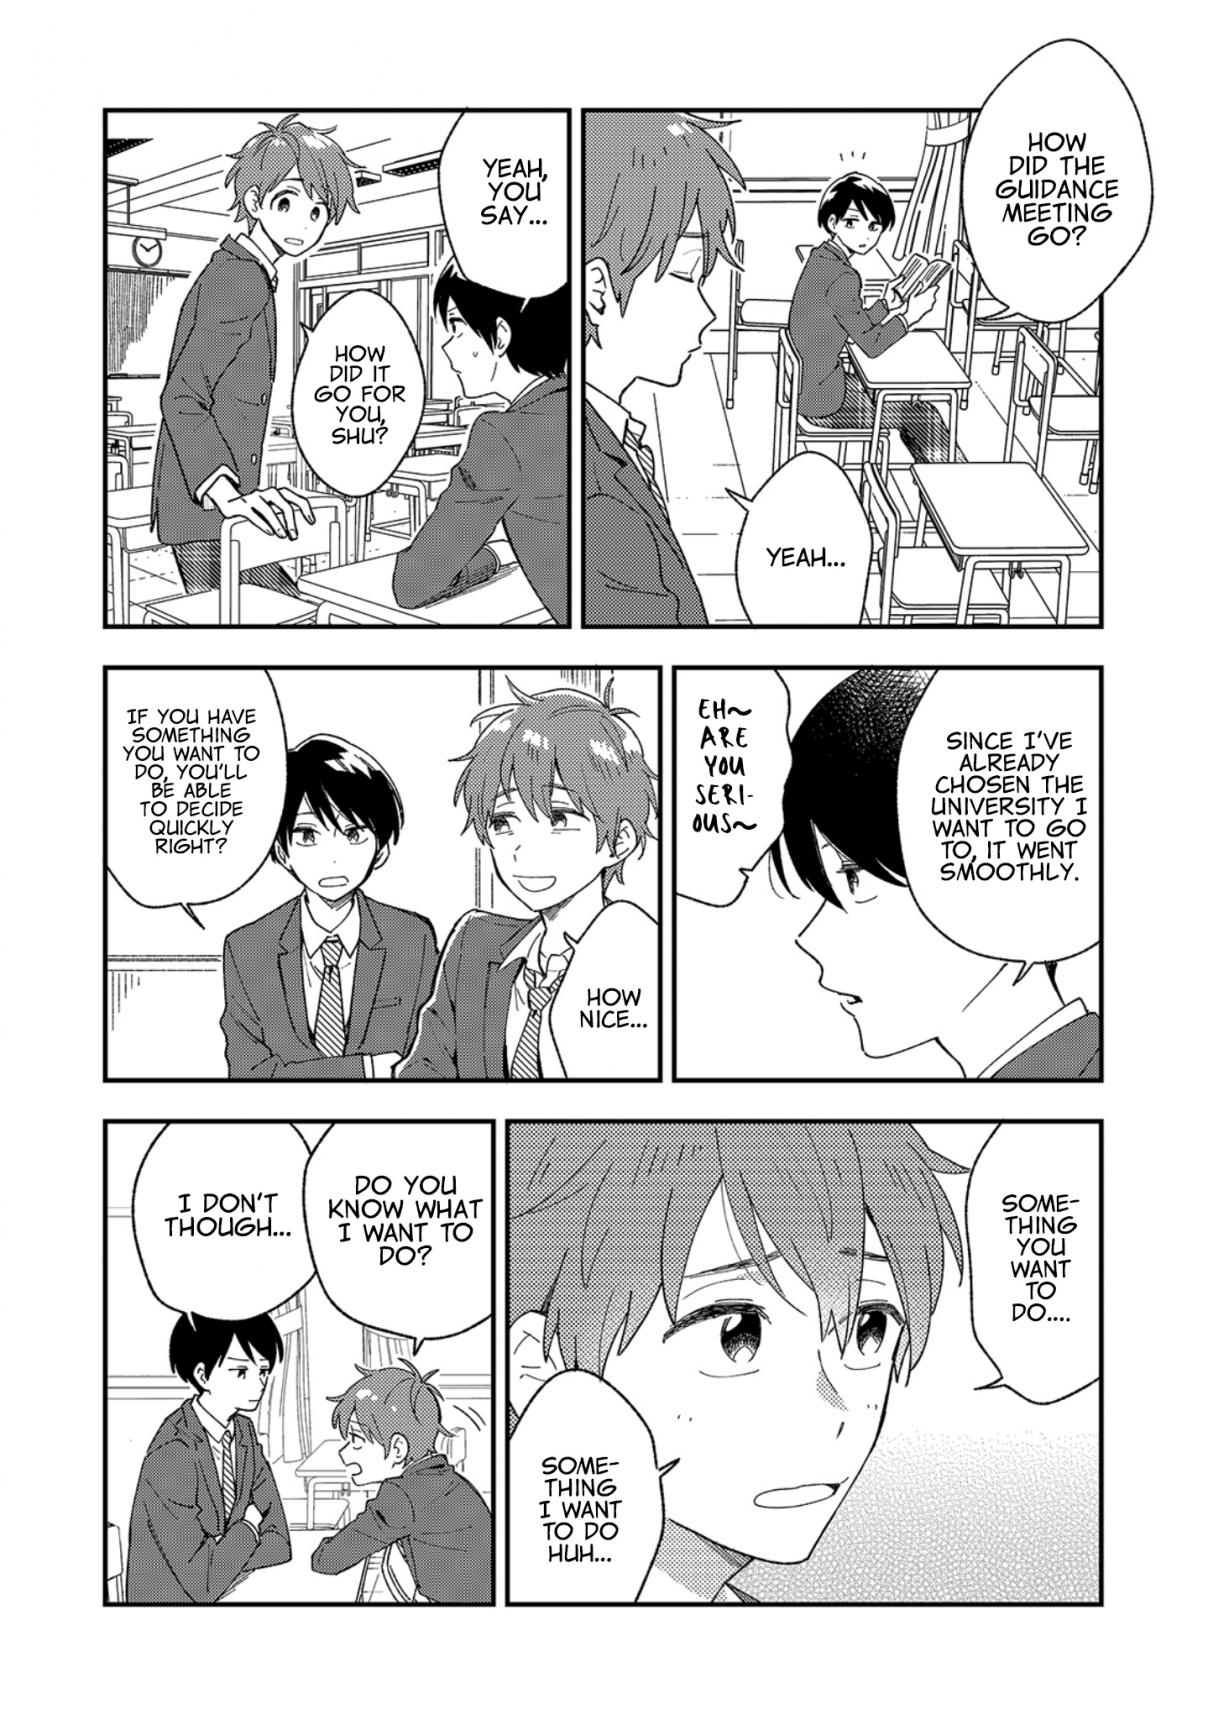 High School Boys Are Hungry Again Today Vol. 1 Ch. 4 Meat Bun